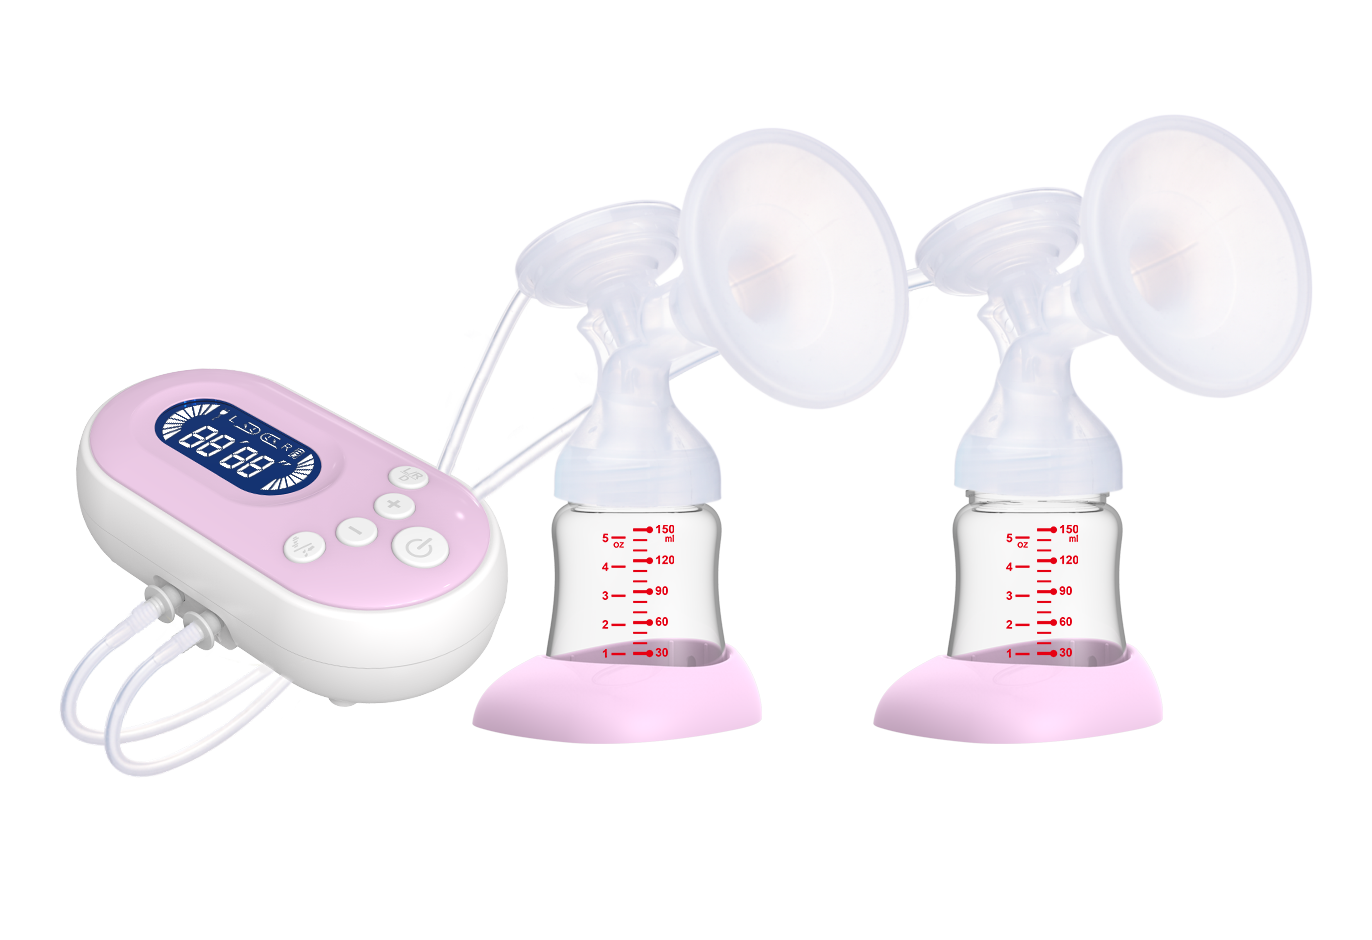 How to use a breast pump?